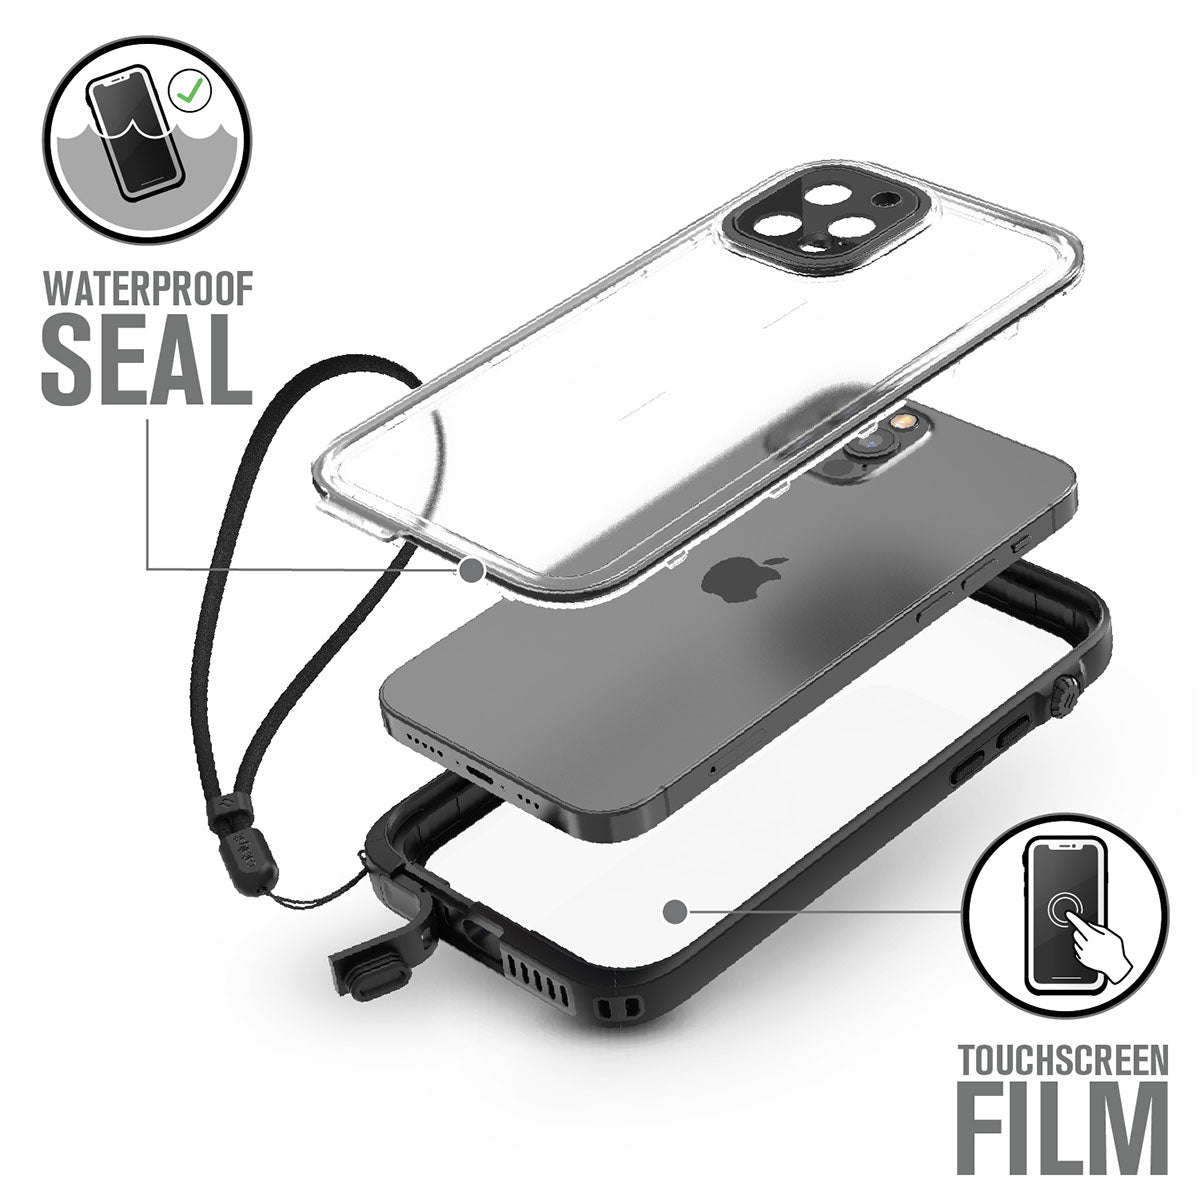 Catalyst iPhone 12 waterproof case total protectionshowing parts of the case Text reads waterproof seal touchscreen film